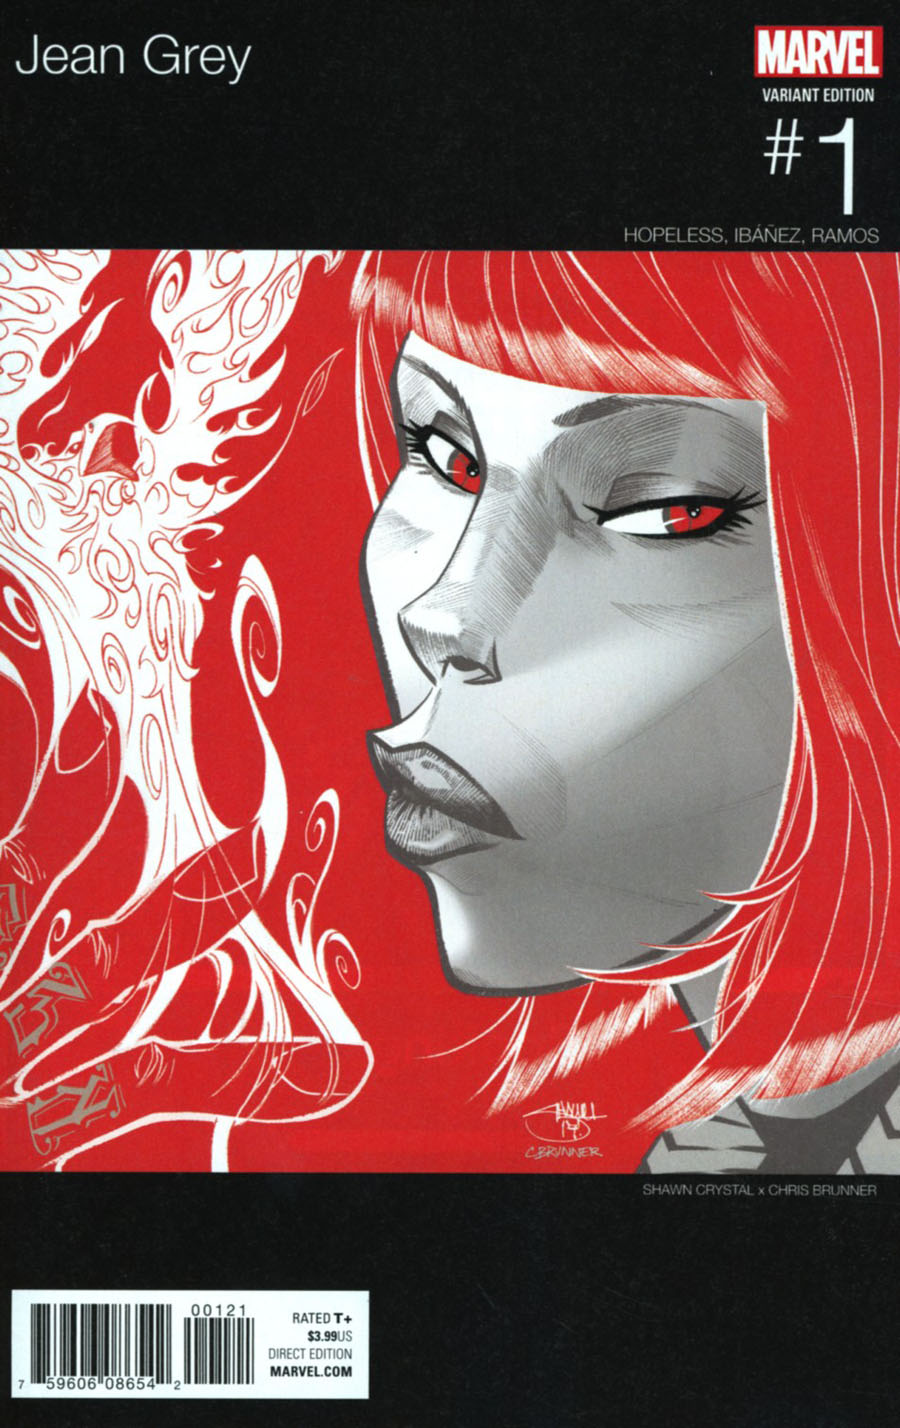 Jean Grey #1 Cover B Variant Shawn Crystal Marvel Hip-Hop Cover (Resurrxion Tie-In)